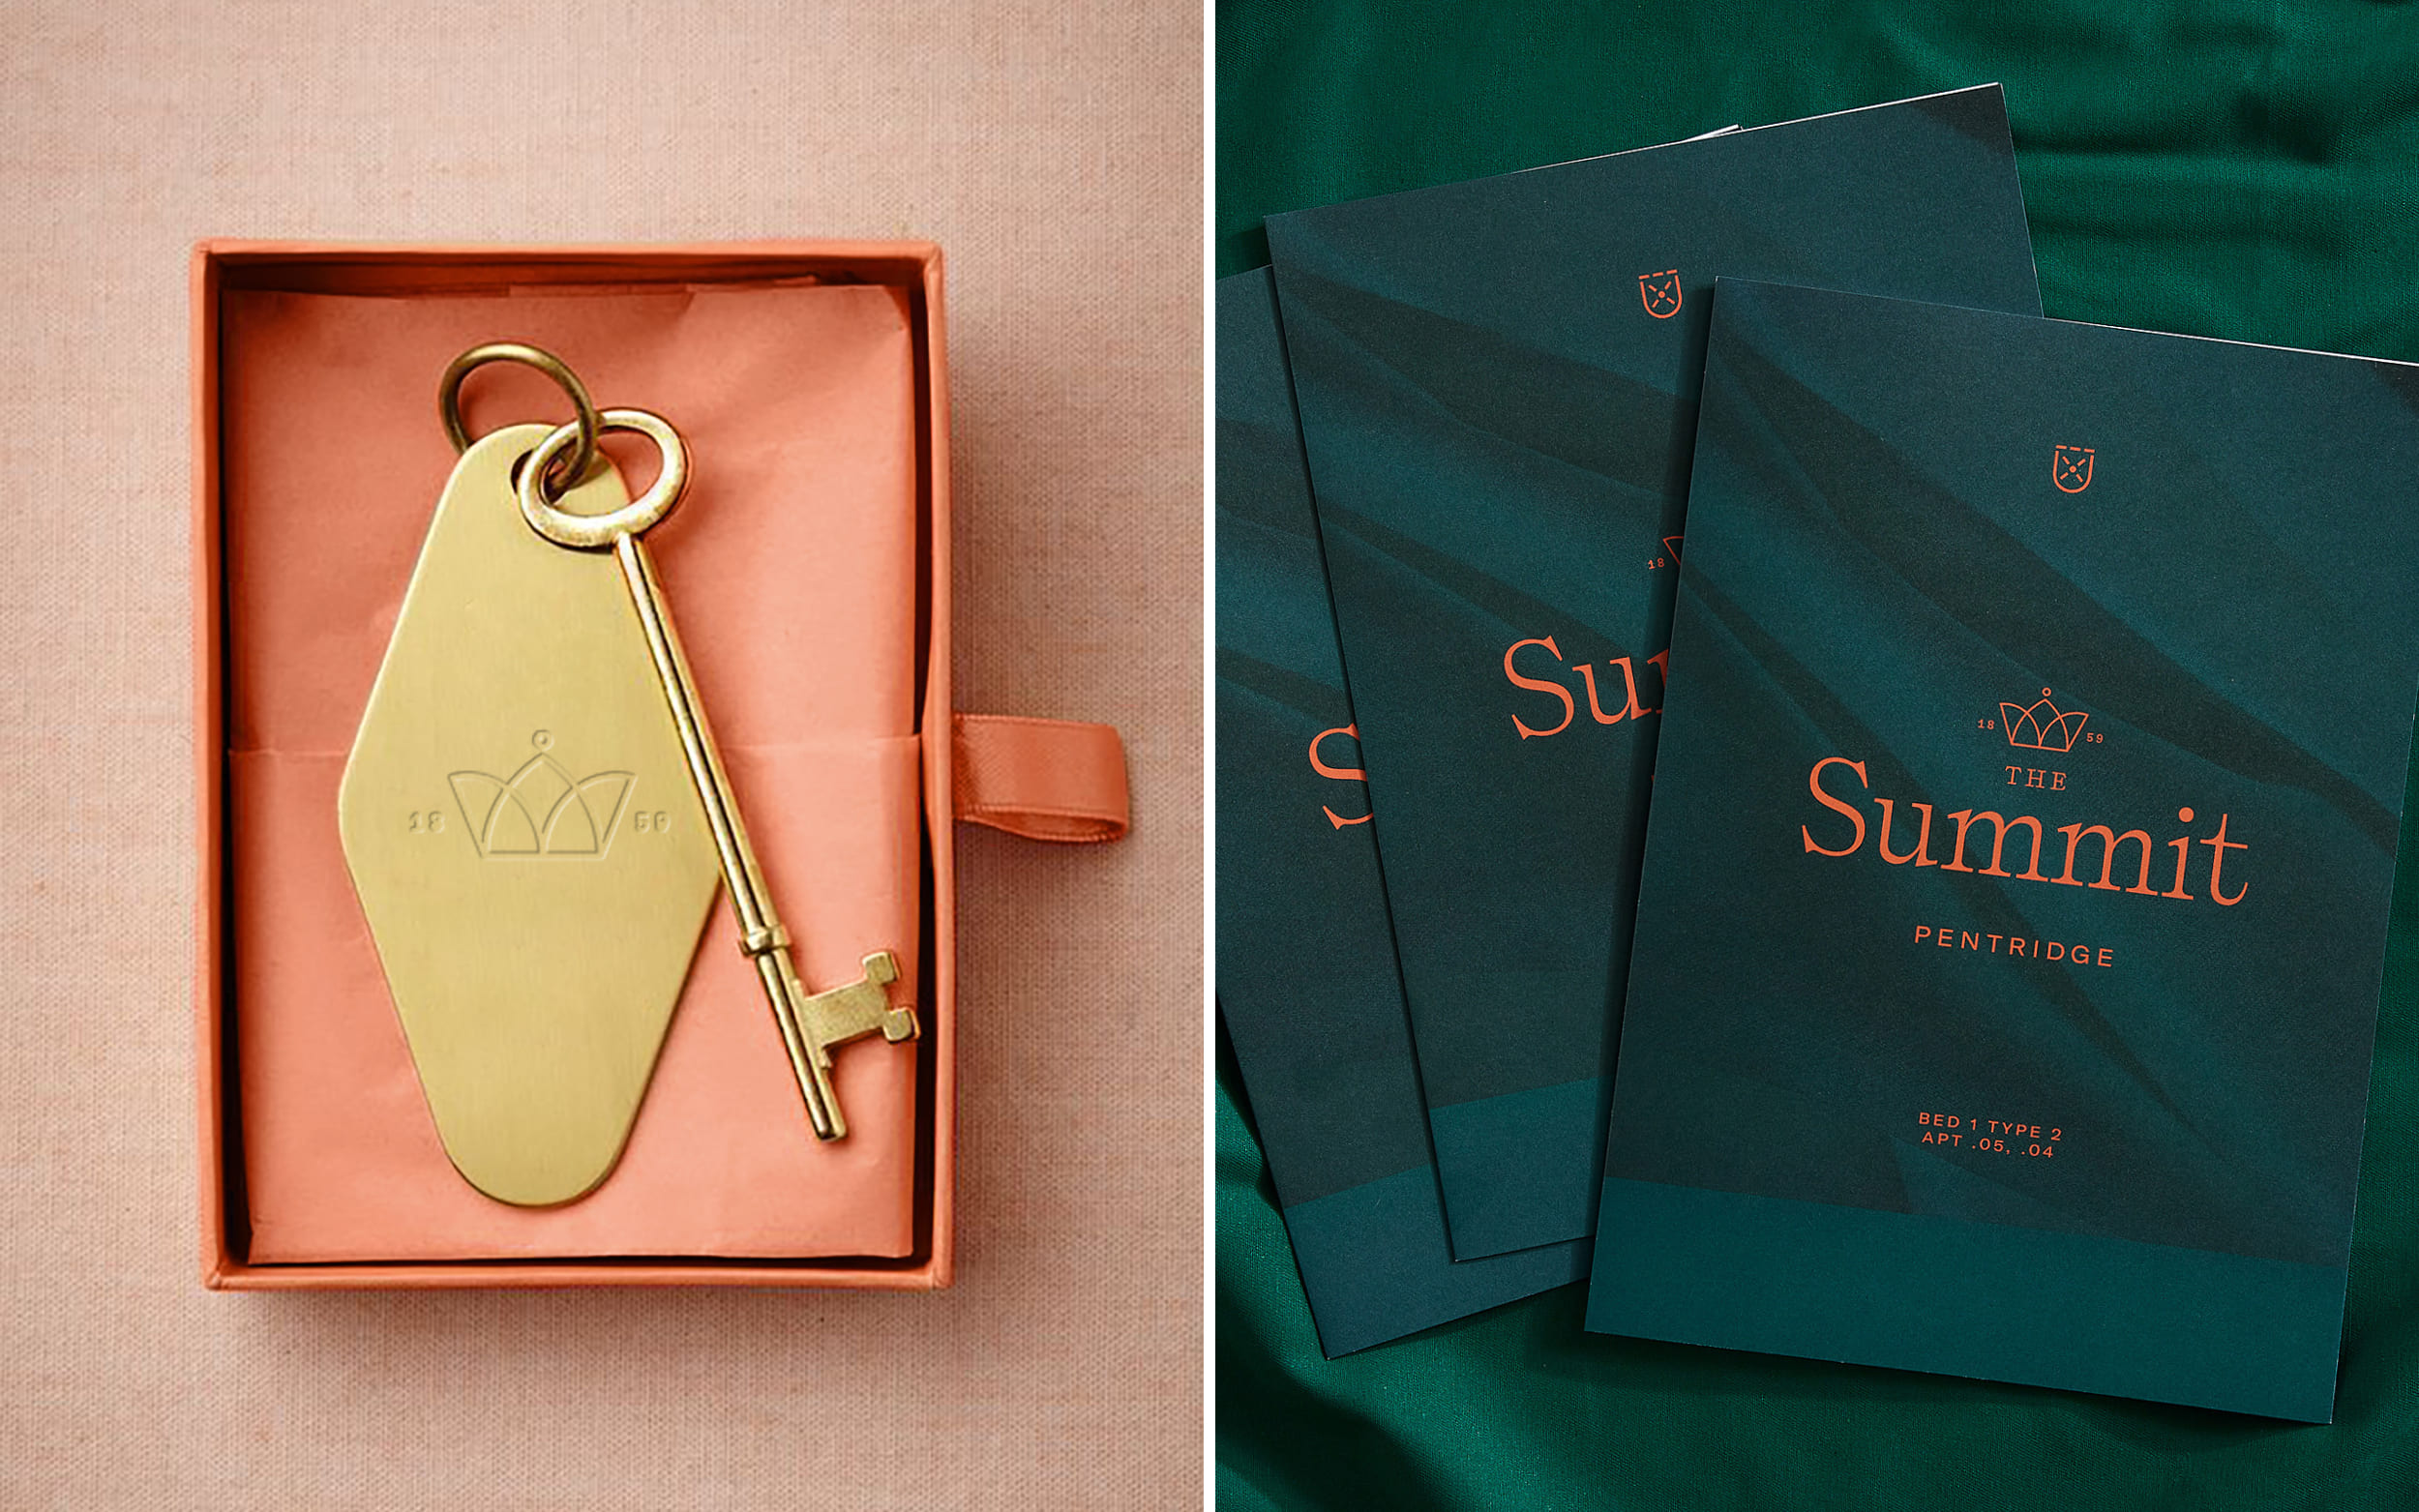 The Summit branded key and apartment booklet